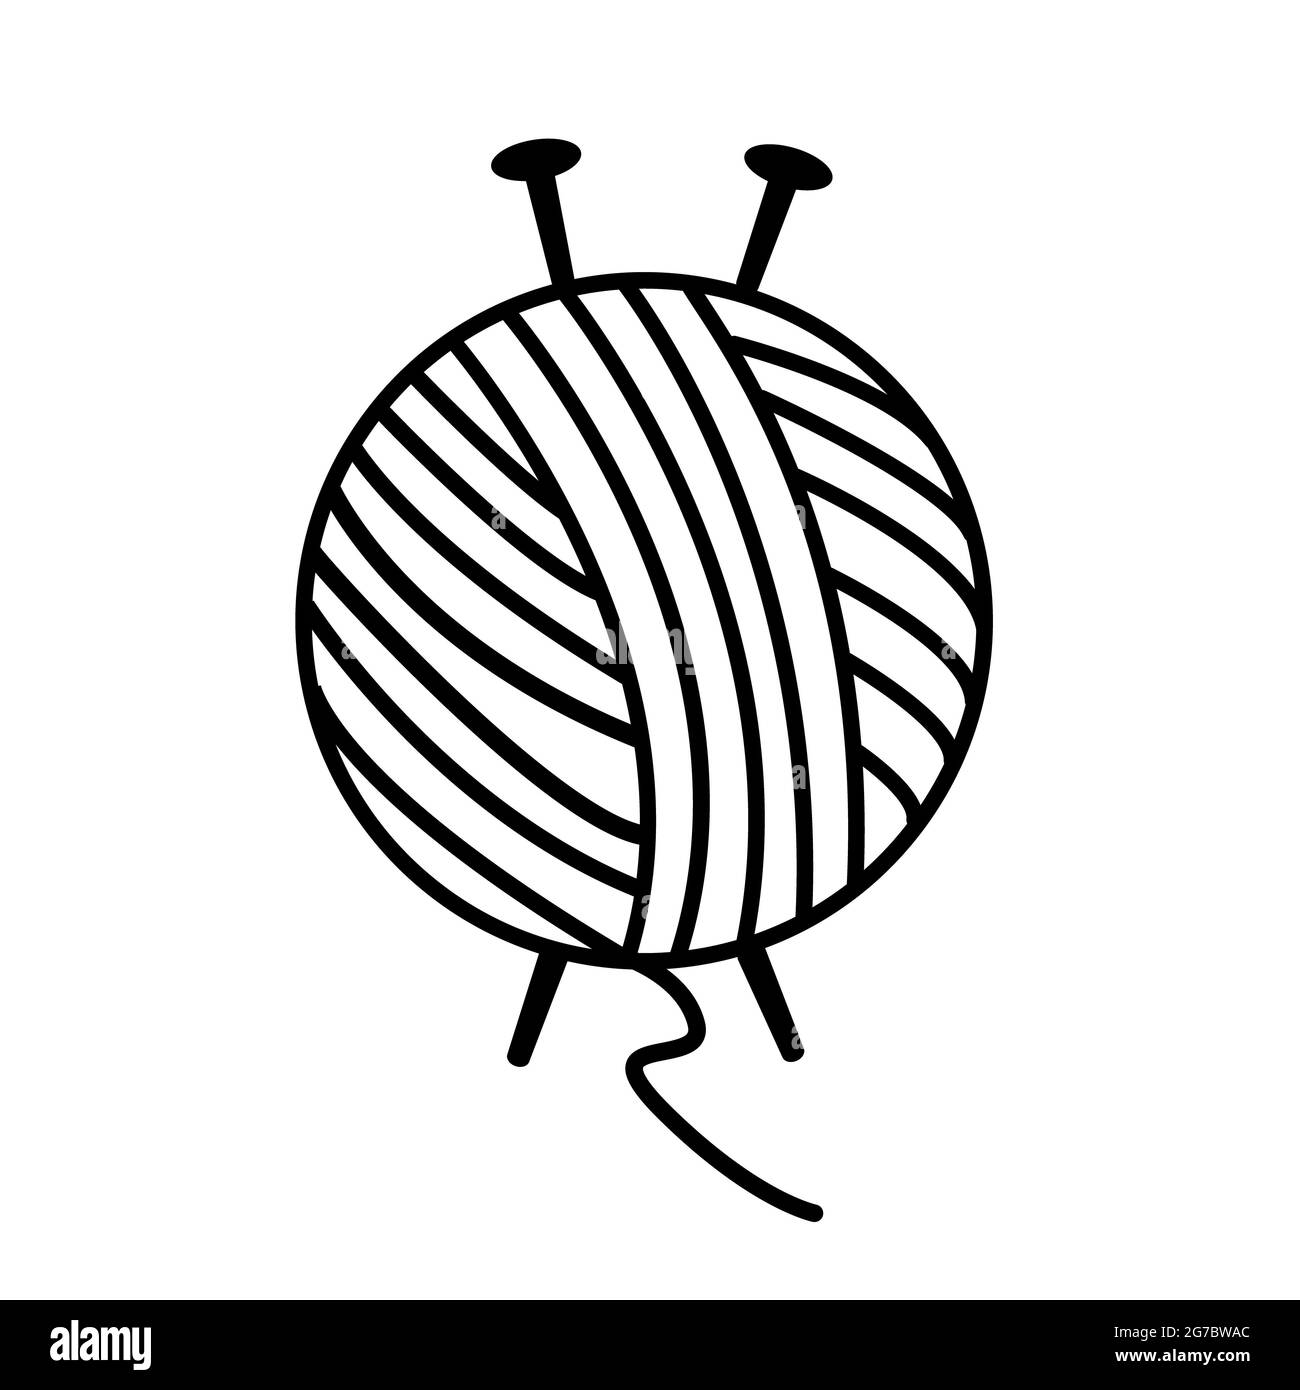 yarn clipart black and white